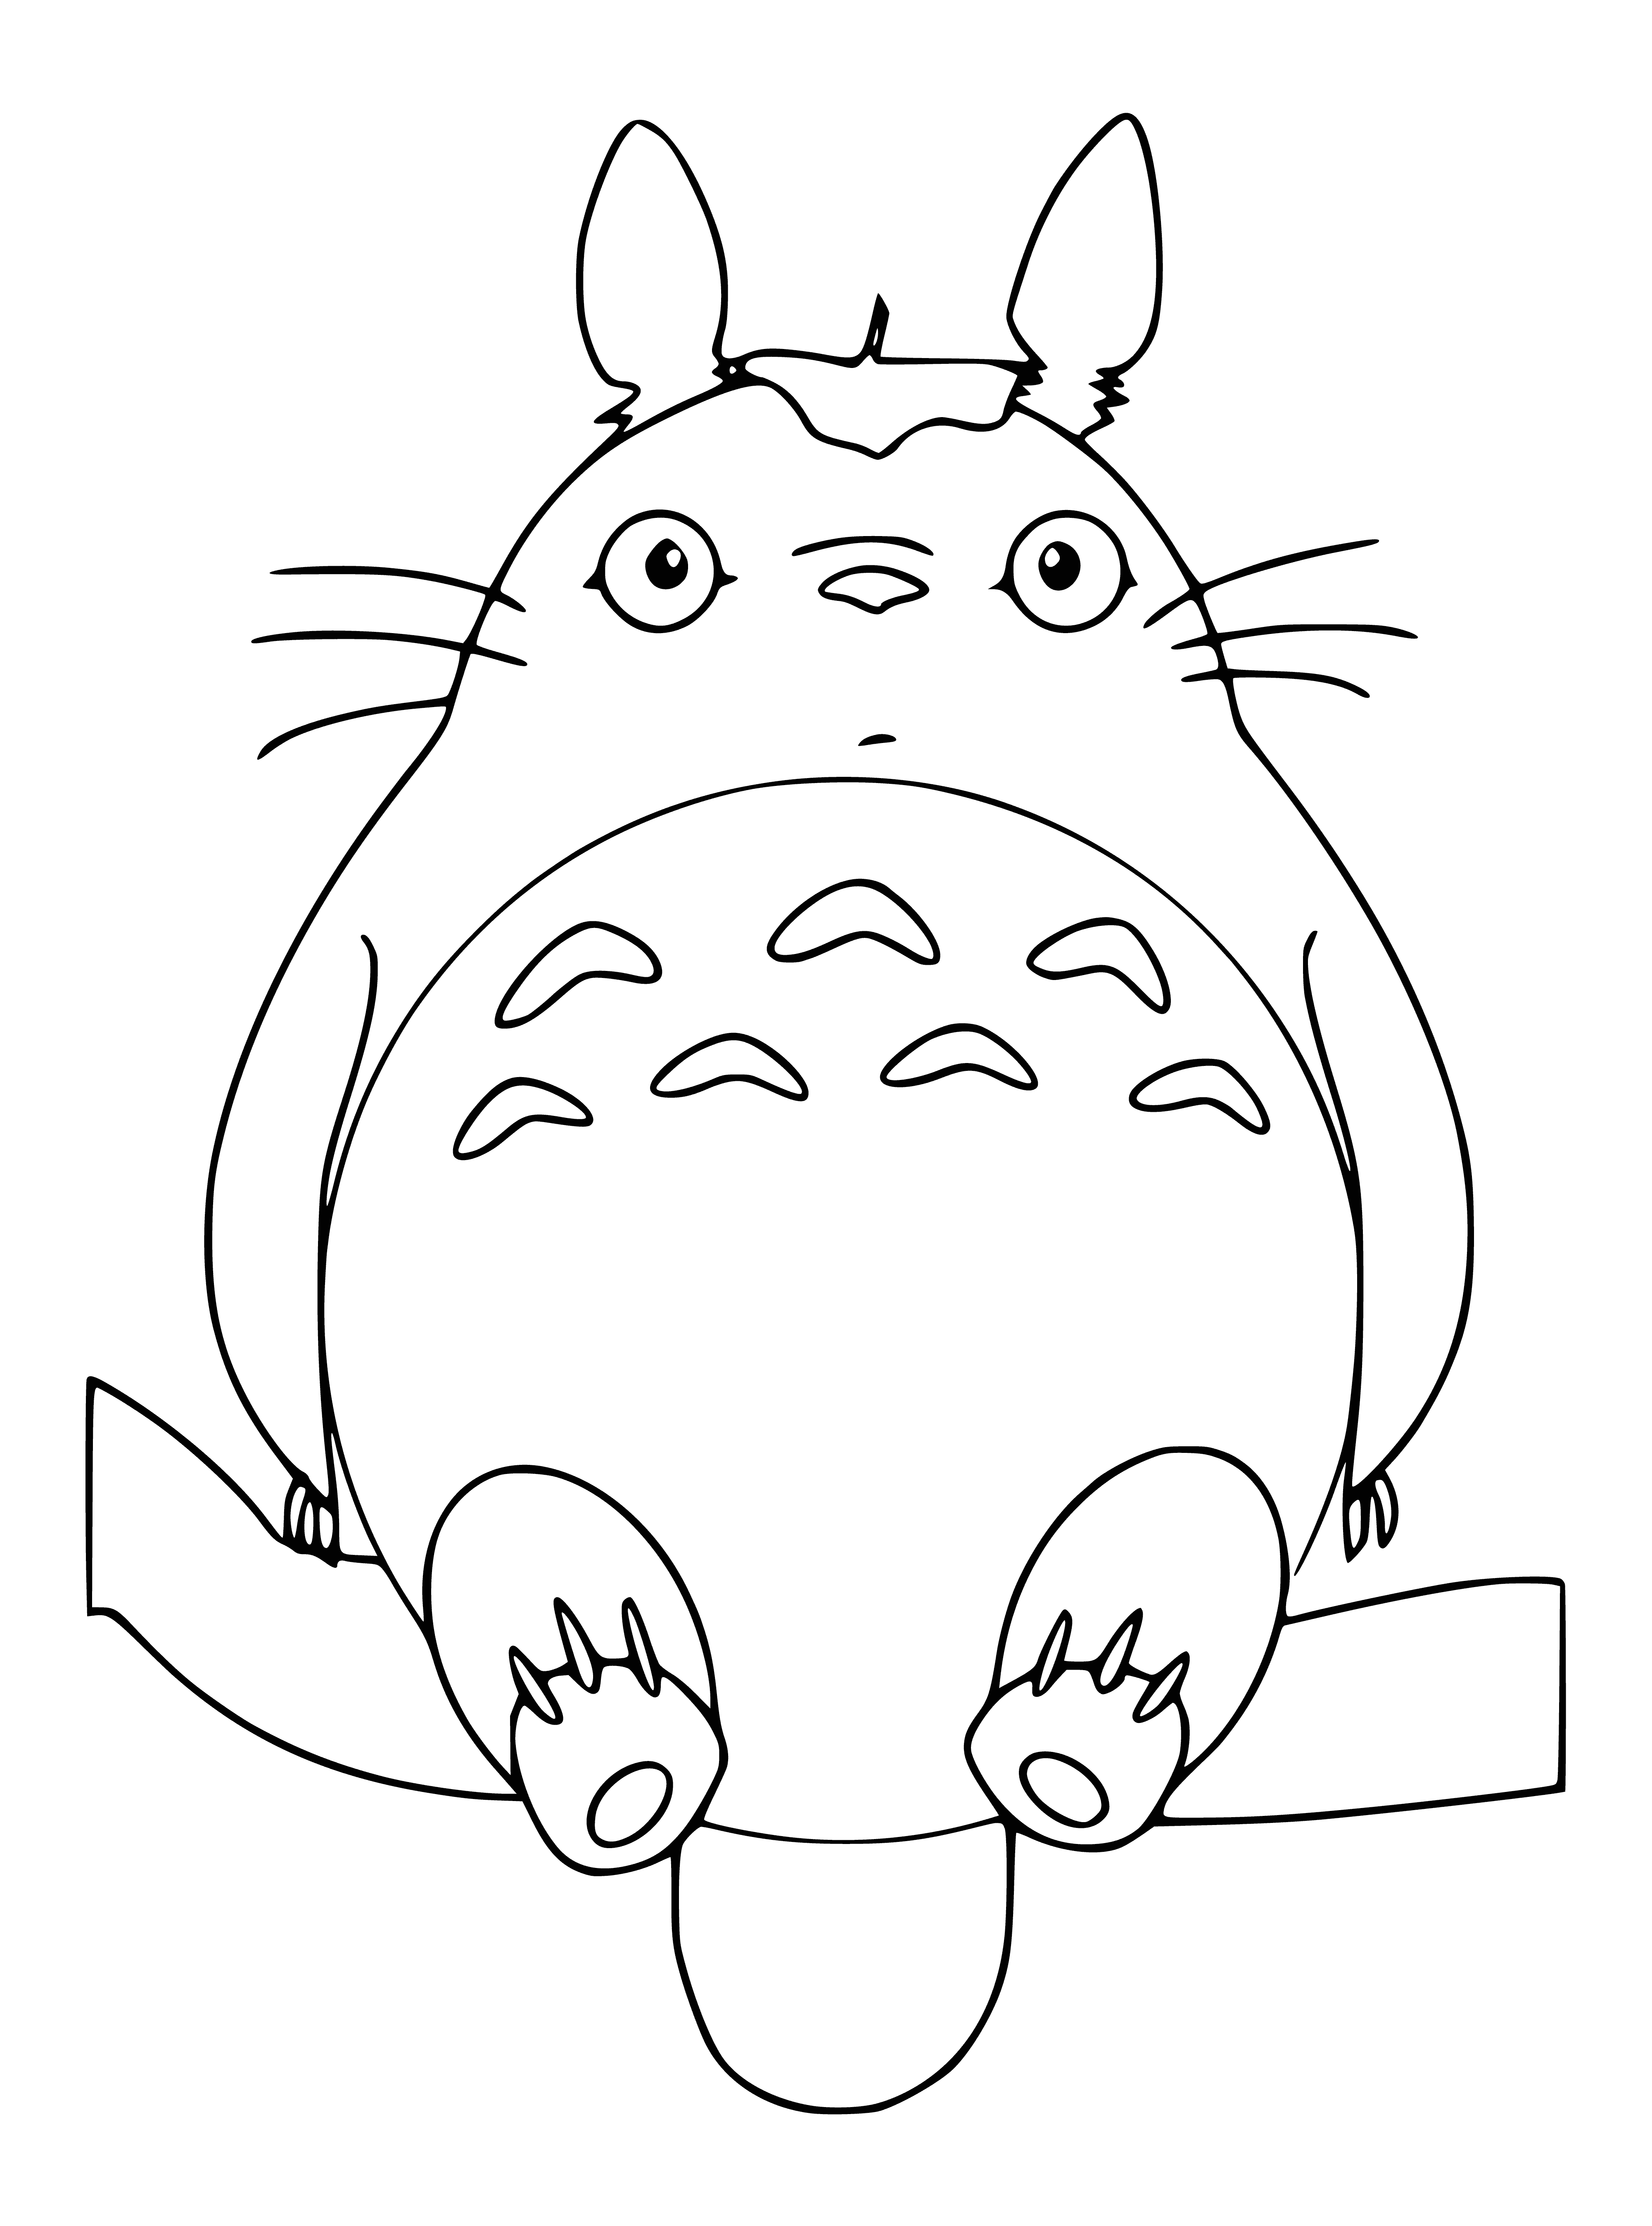 Totoro on the branches coloring page